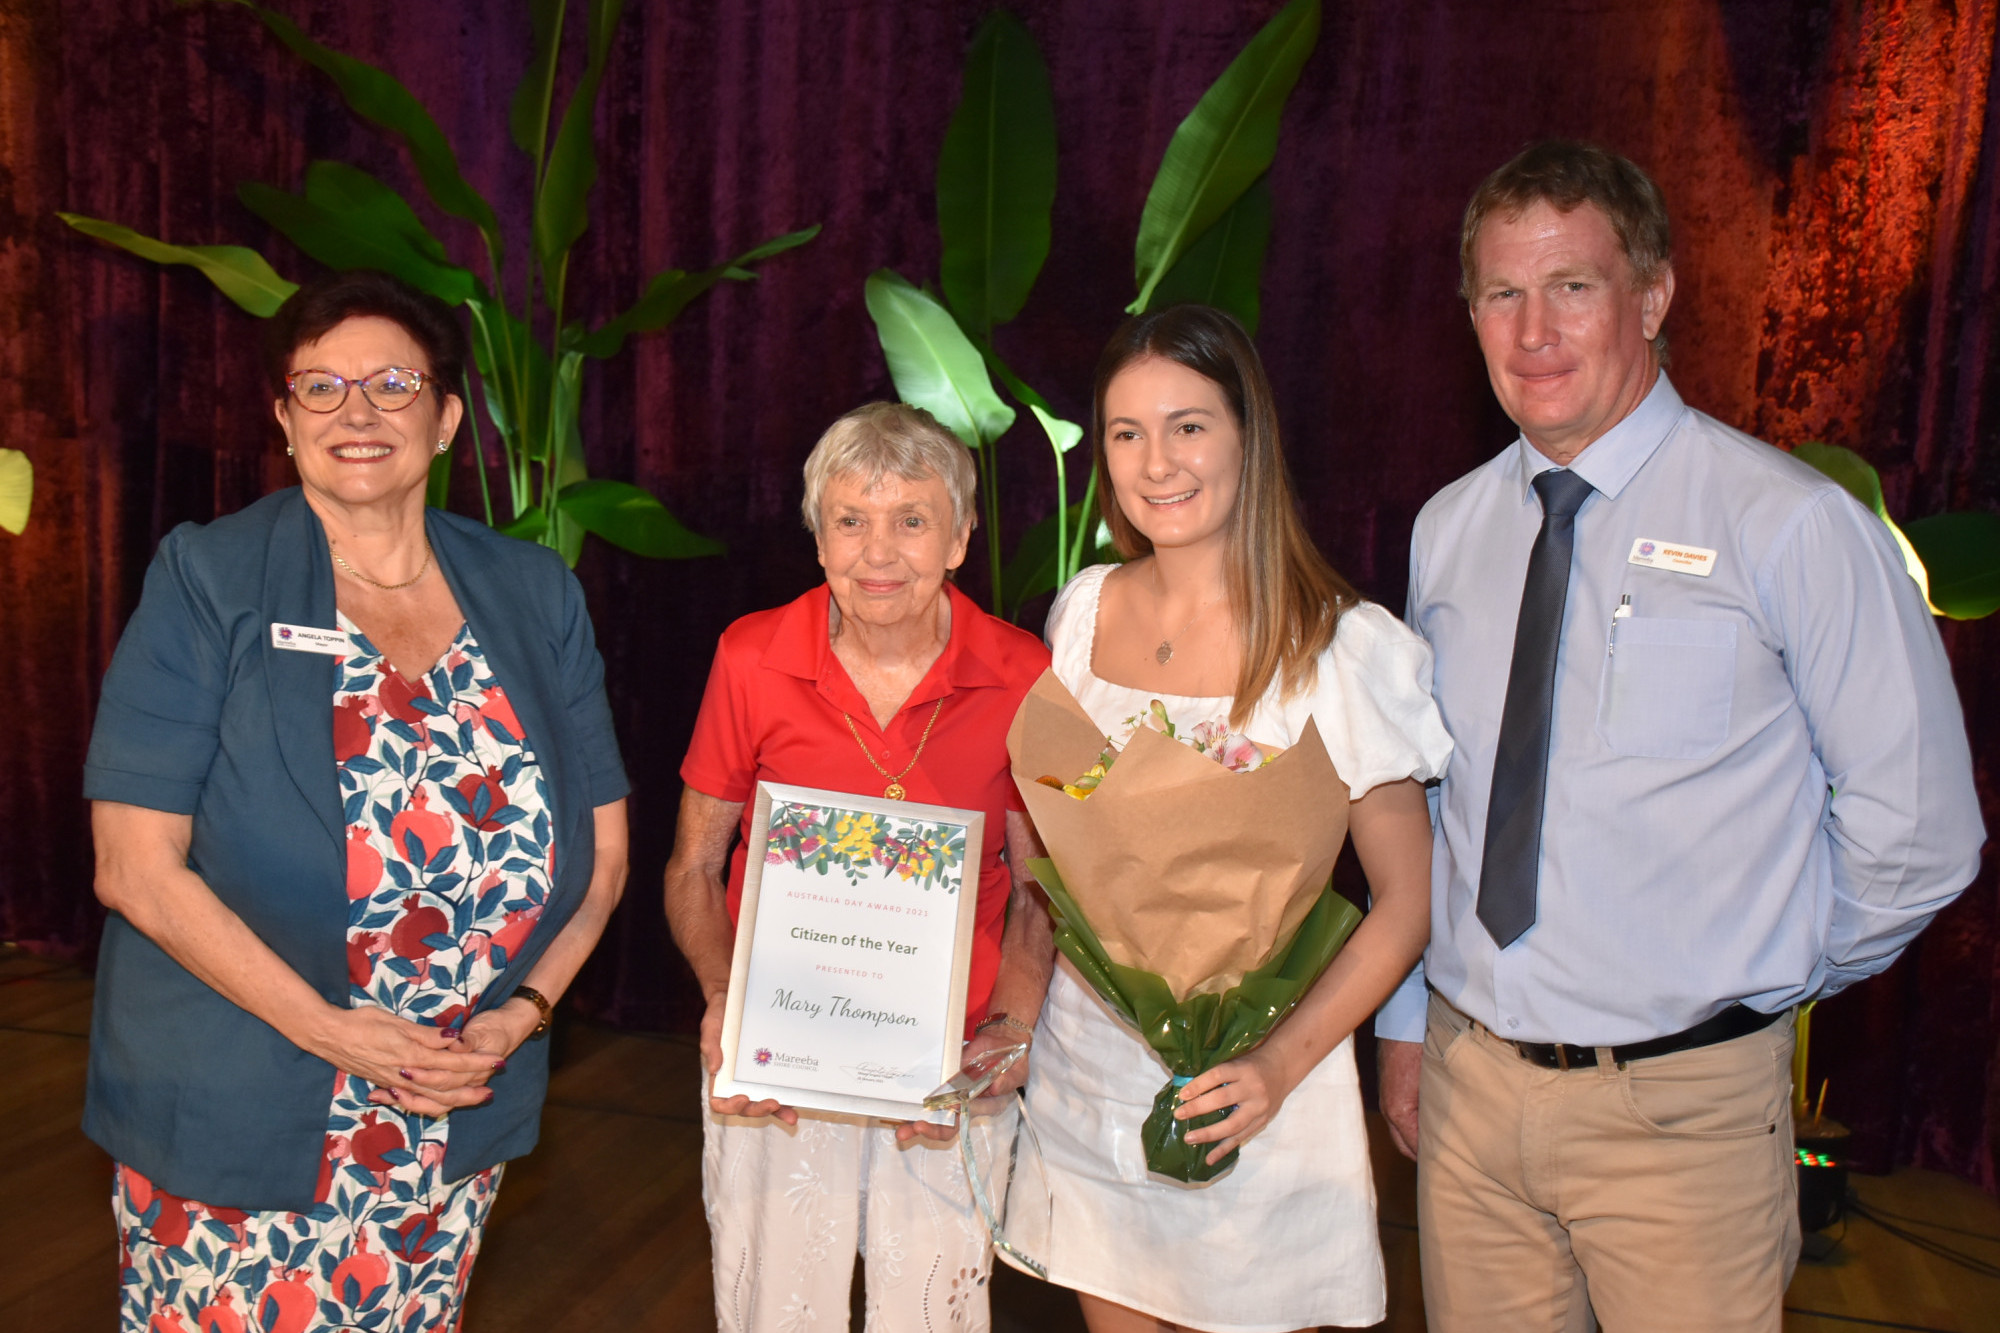 (L-R) Mayor Angela Toppin with the Citizen of the Year Mary Thompson and Young Citizen of the Year Guila Pilat., and Deputy Mayor Councillor Davies.